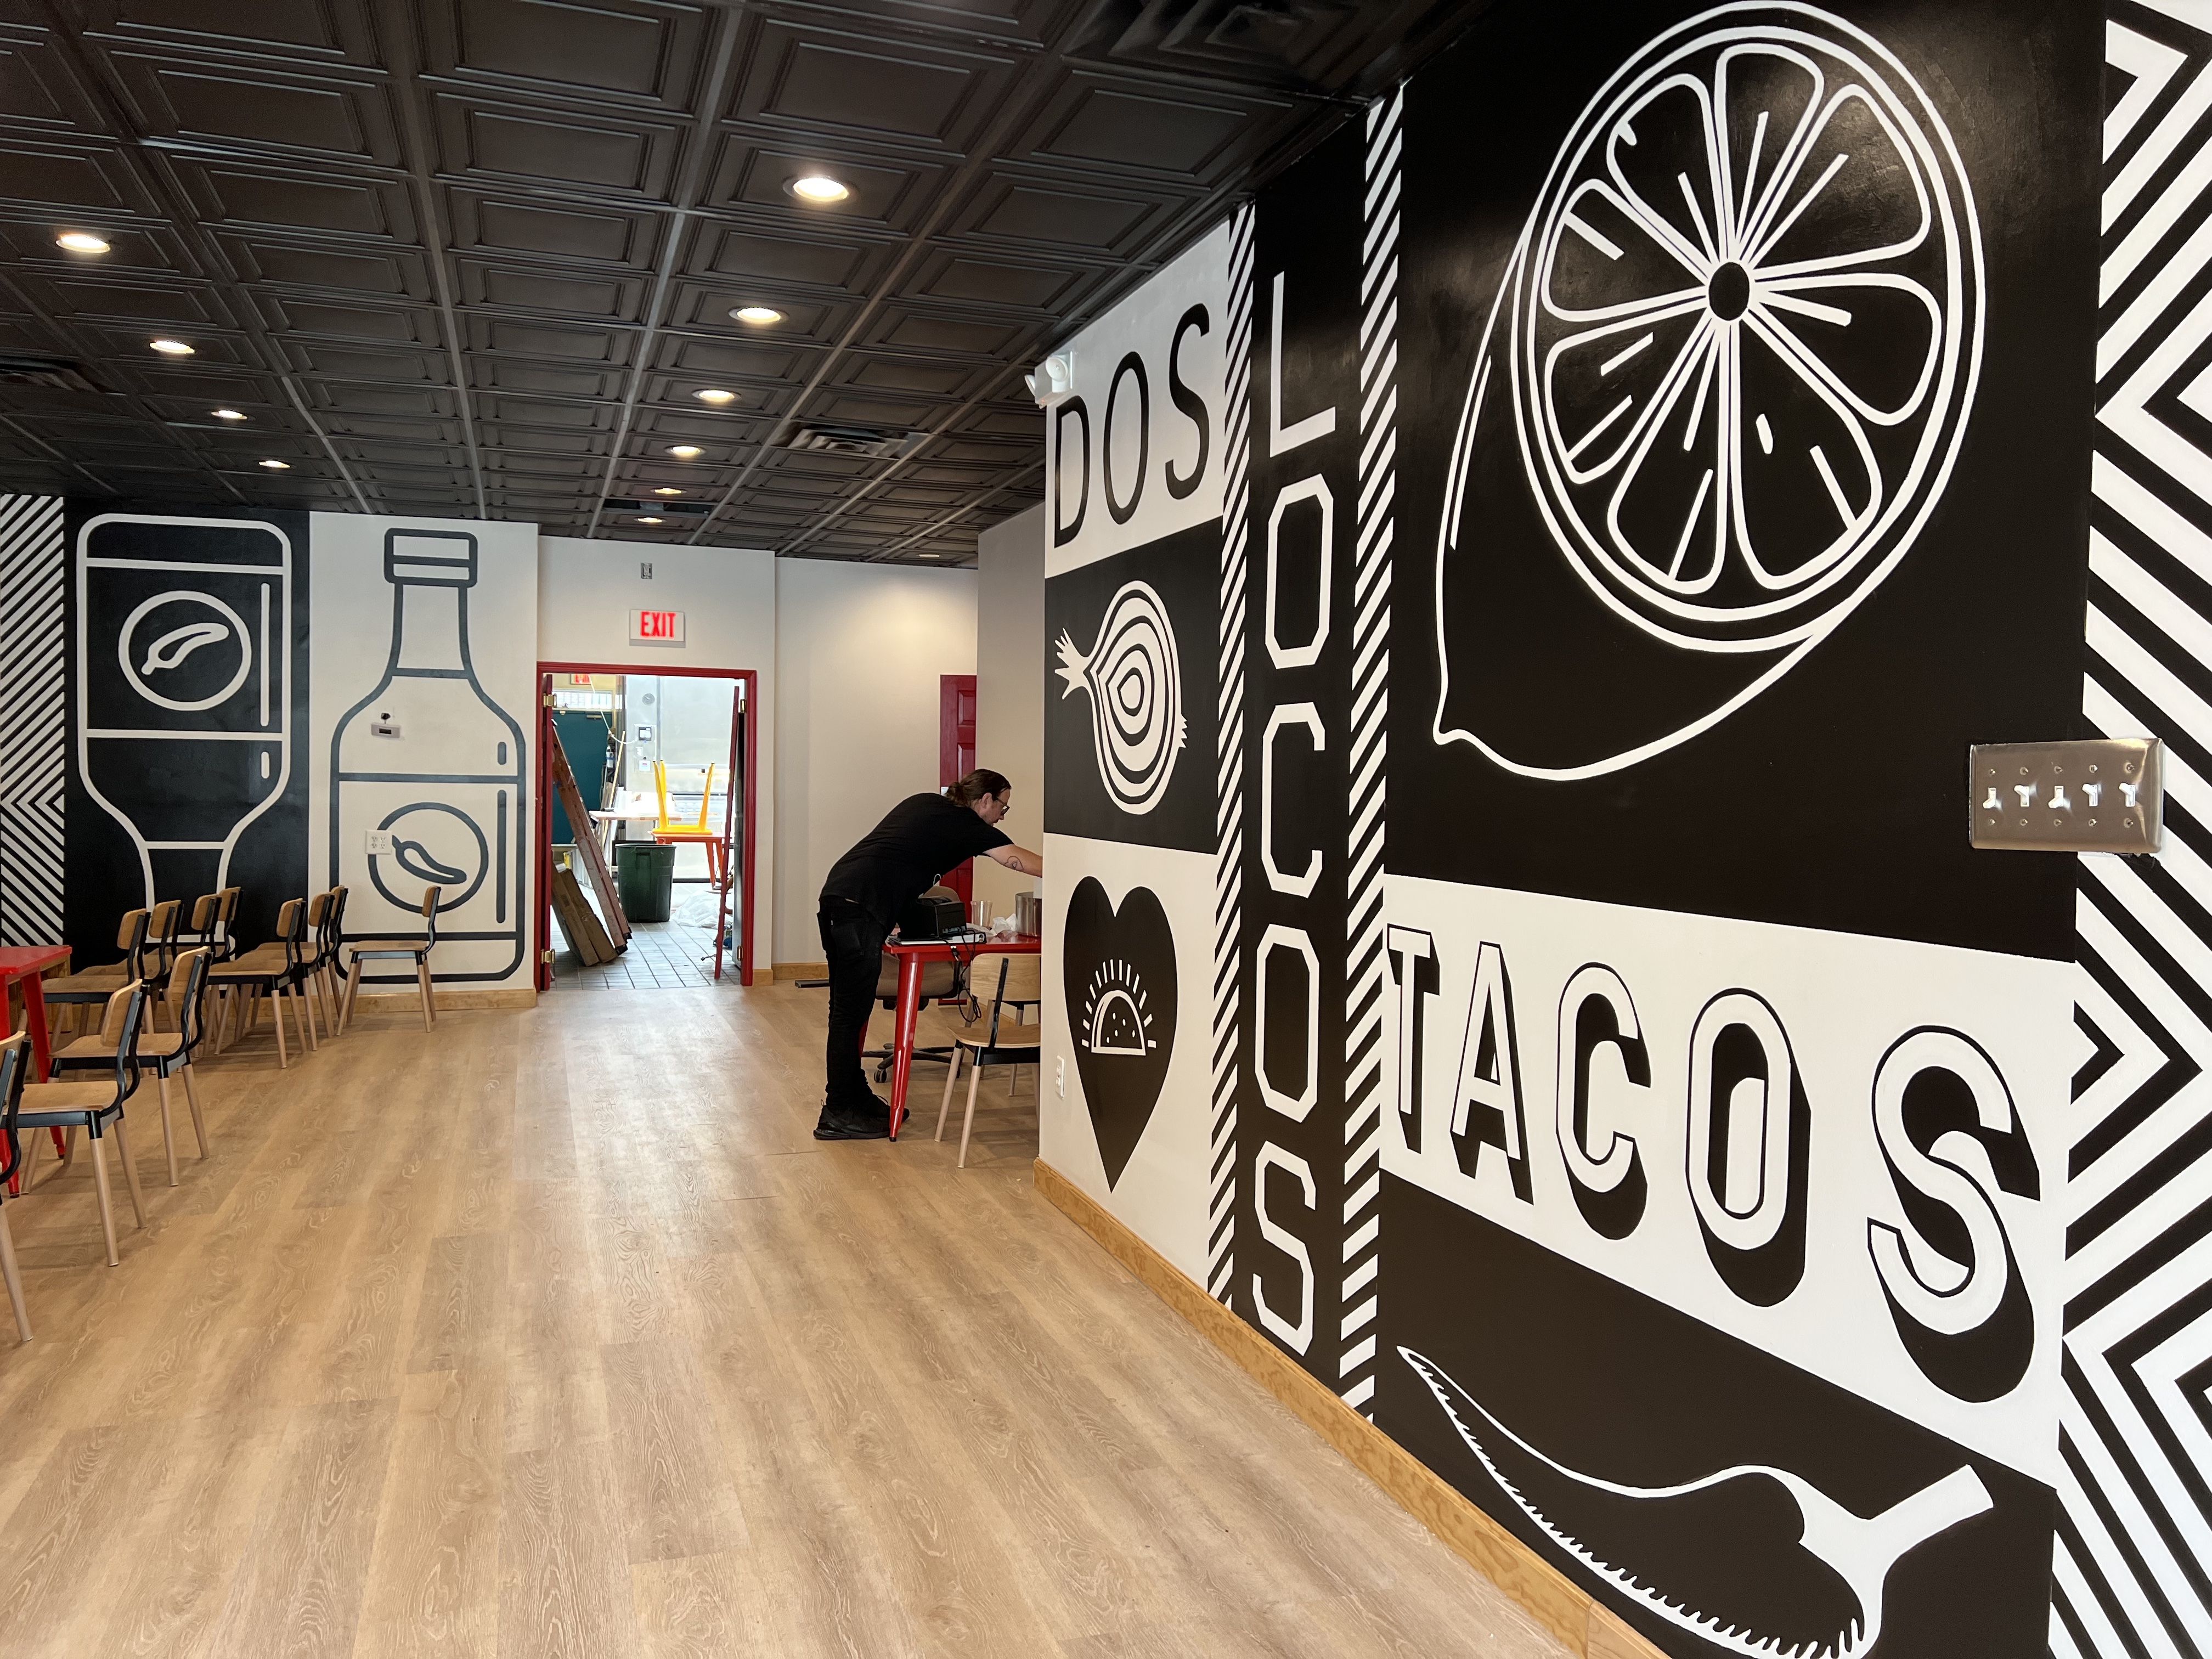 Inside the new Dos Locos Tacos space.